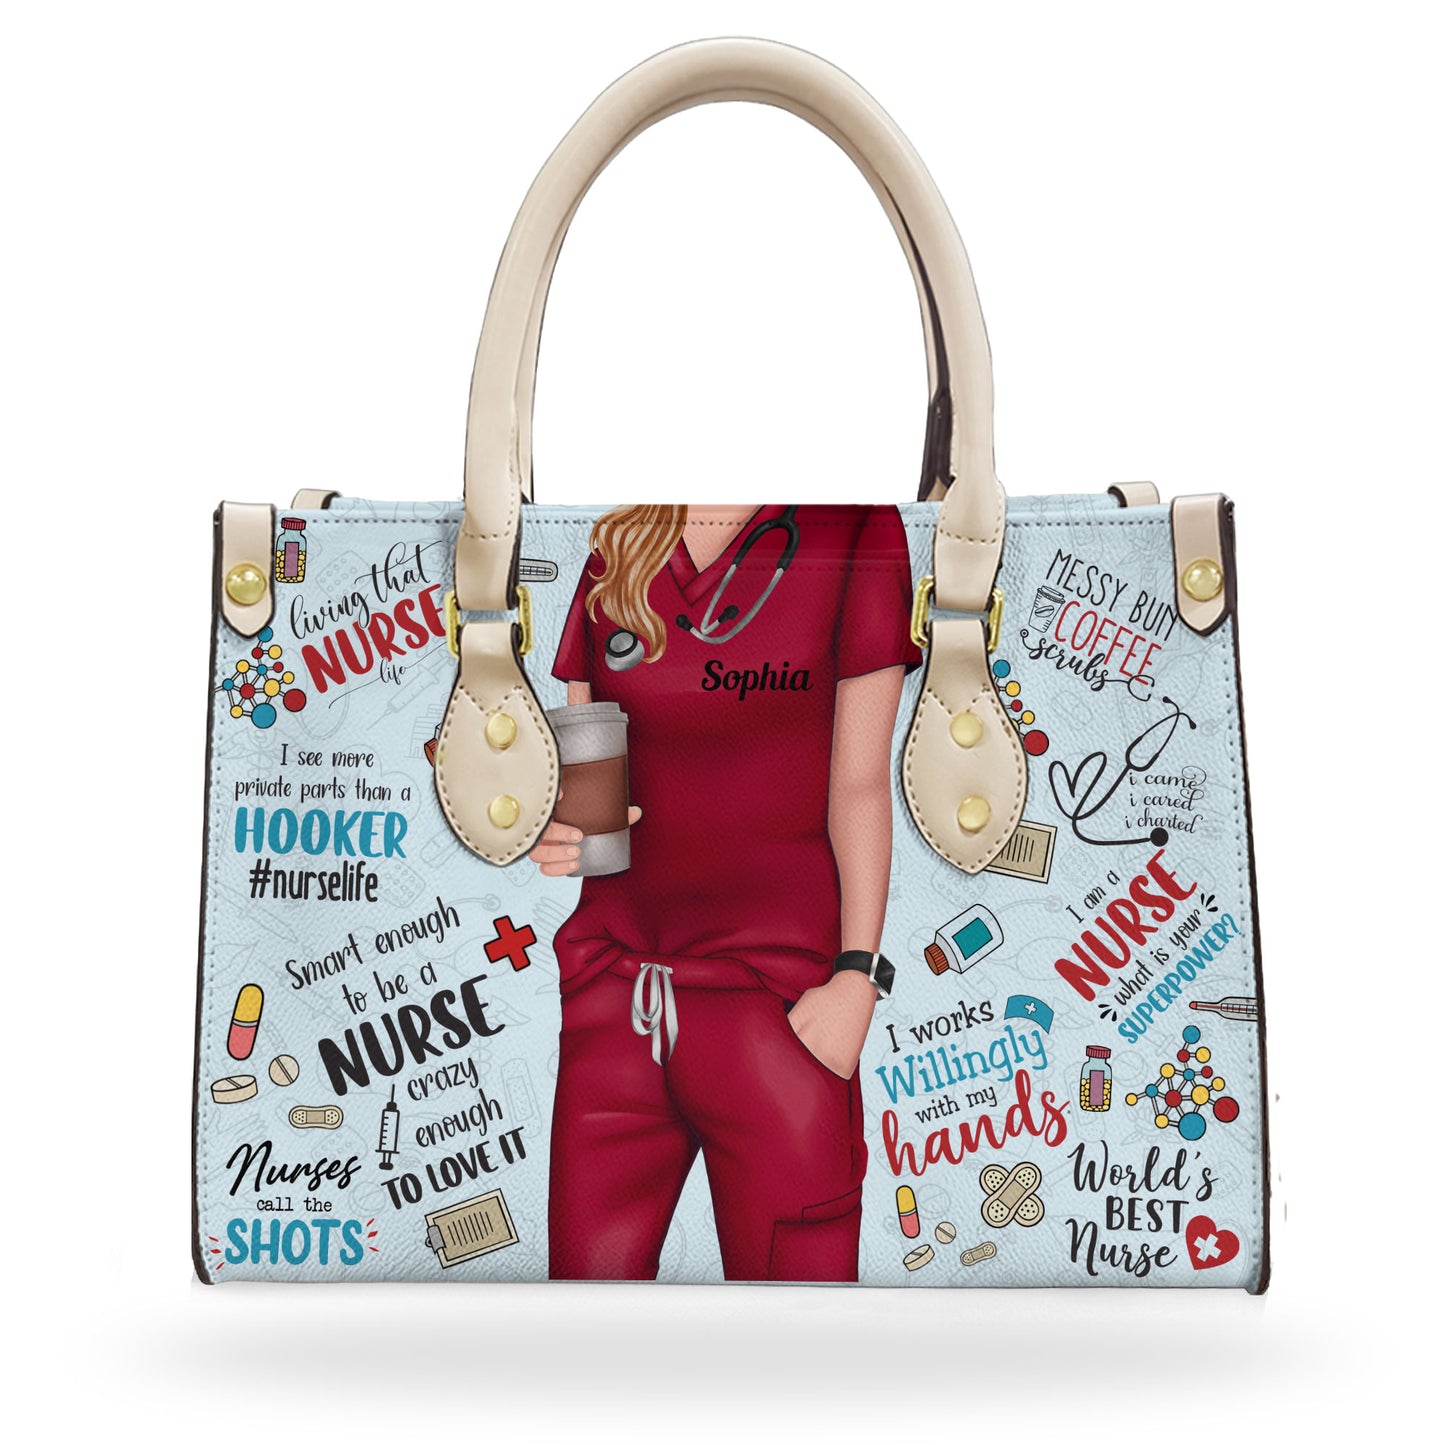 Living That Nurse Life - Personalized Leather Bag